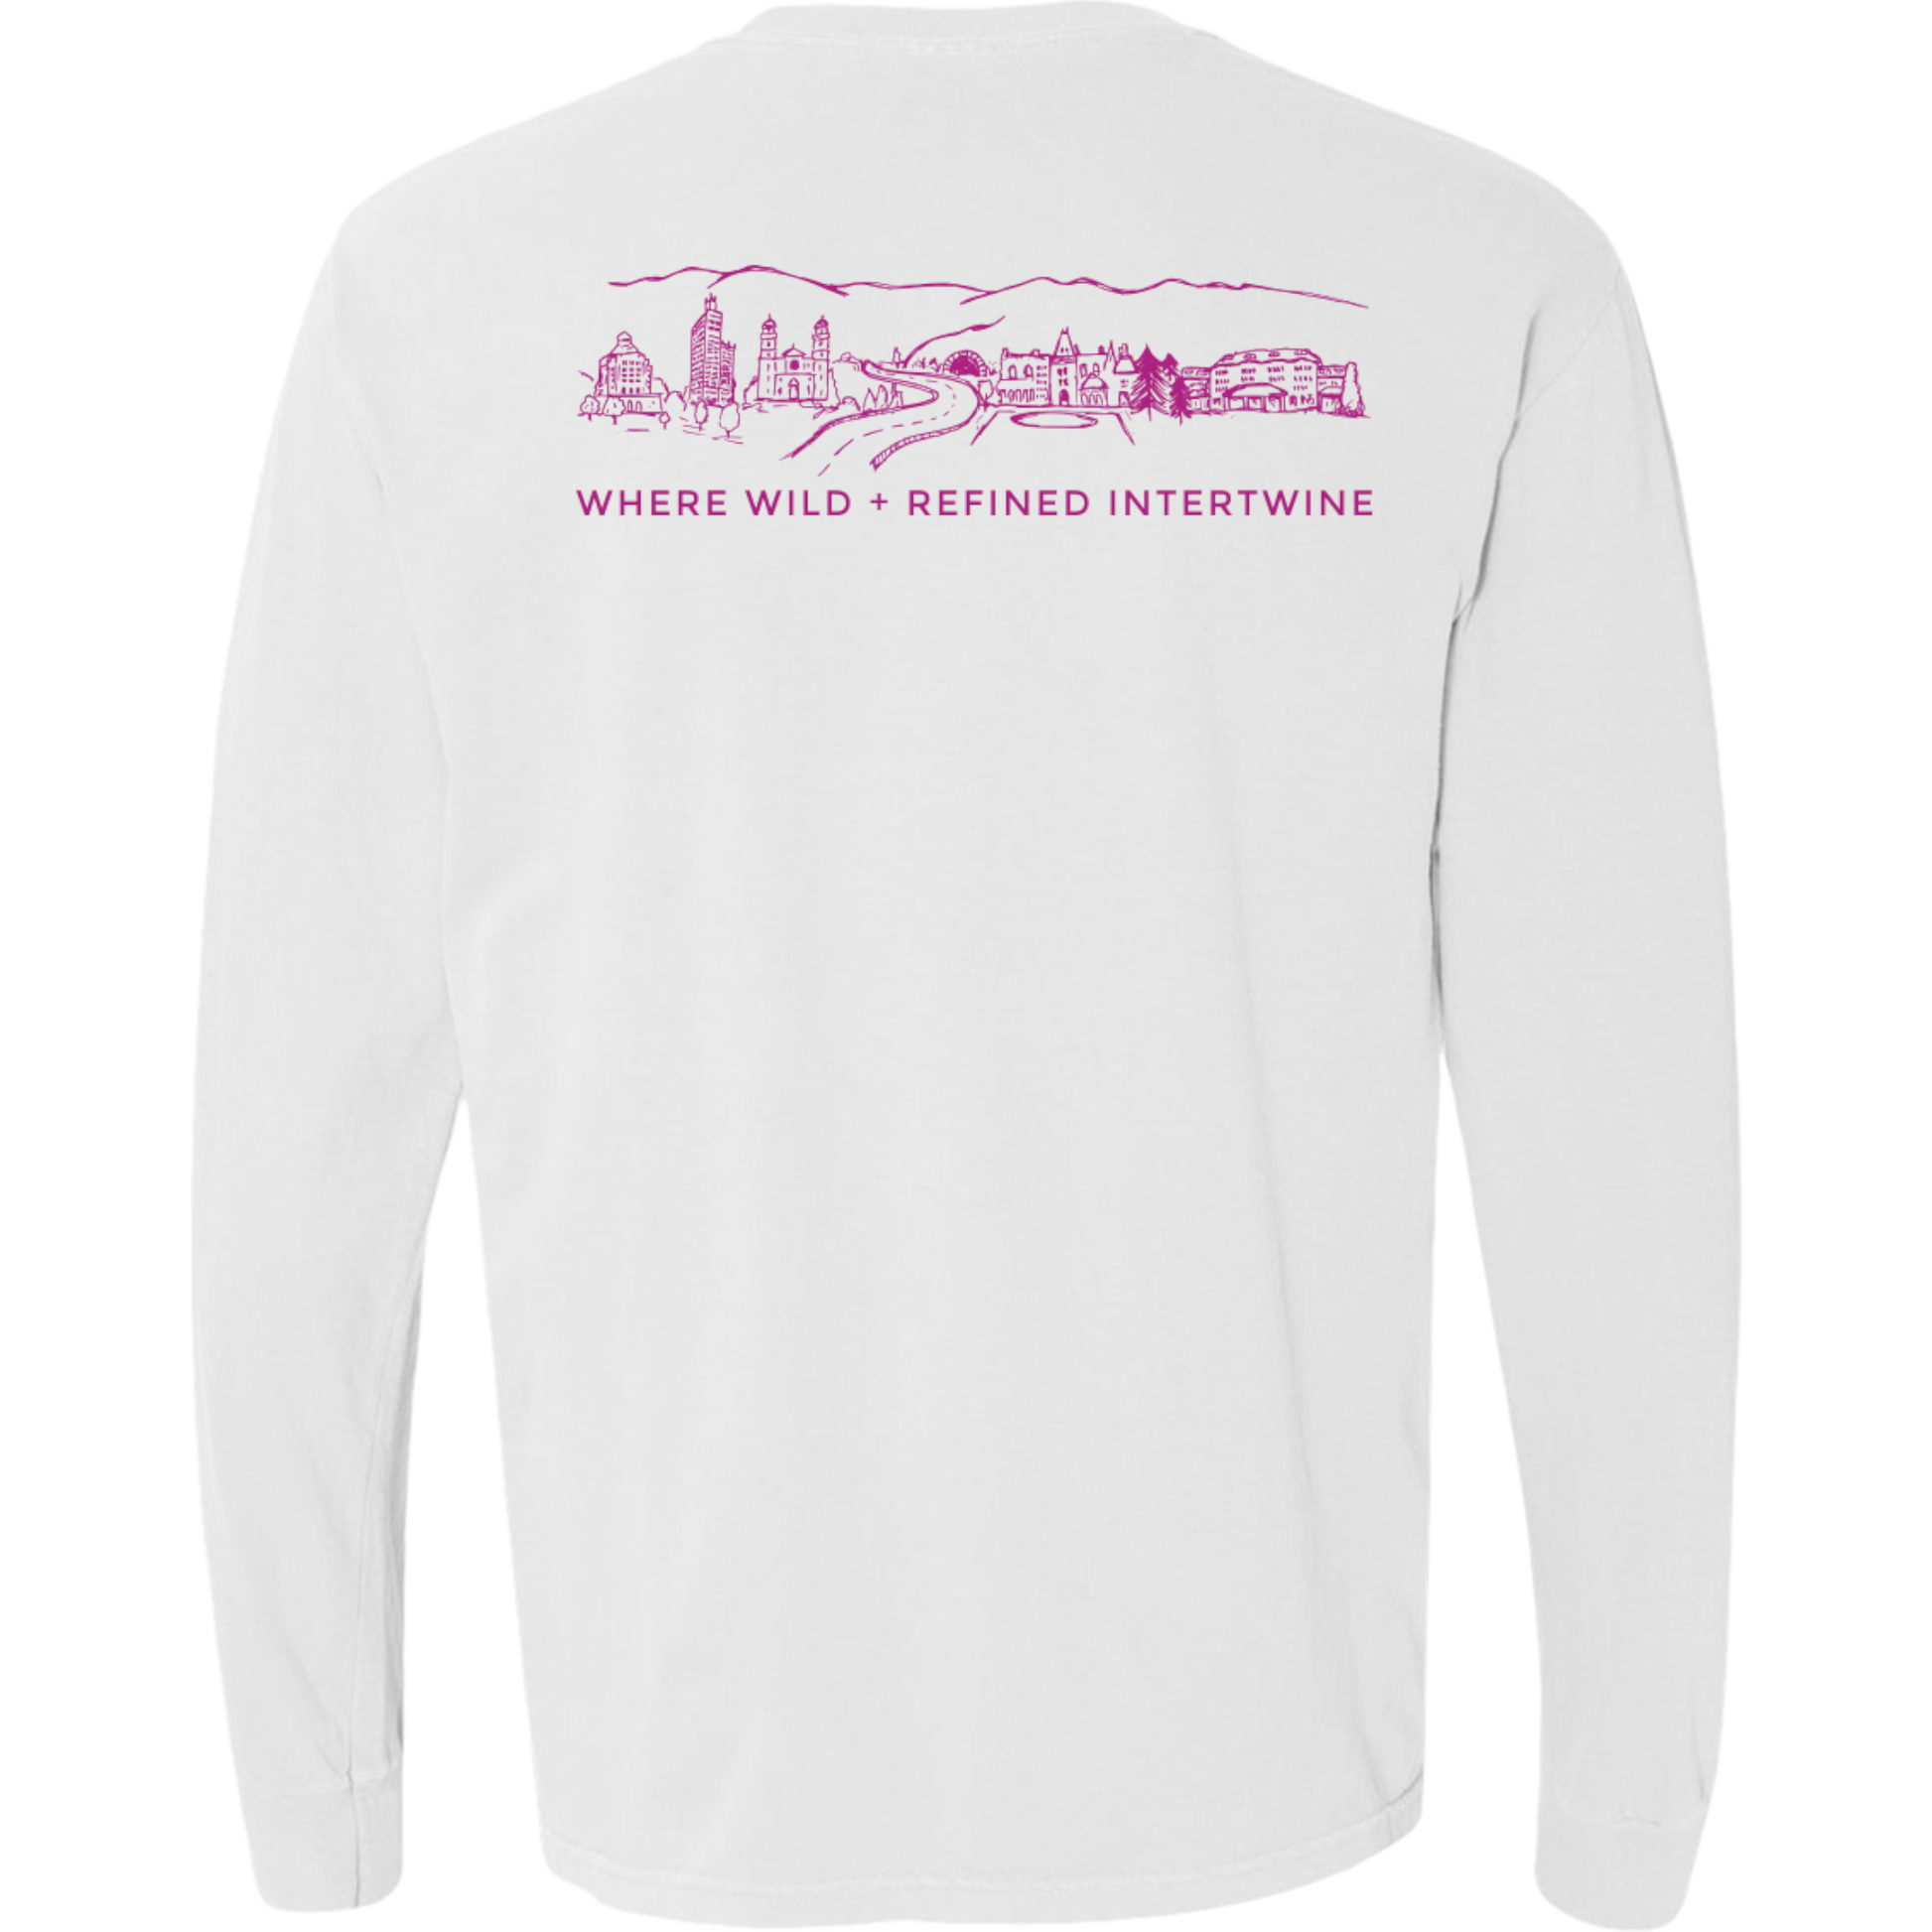 ASHEVILLE Cityscape Long Sleeved T-Shirt in White & Rhododendron Pink - The ASHEVILLE Co. TM